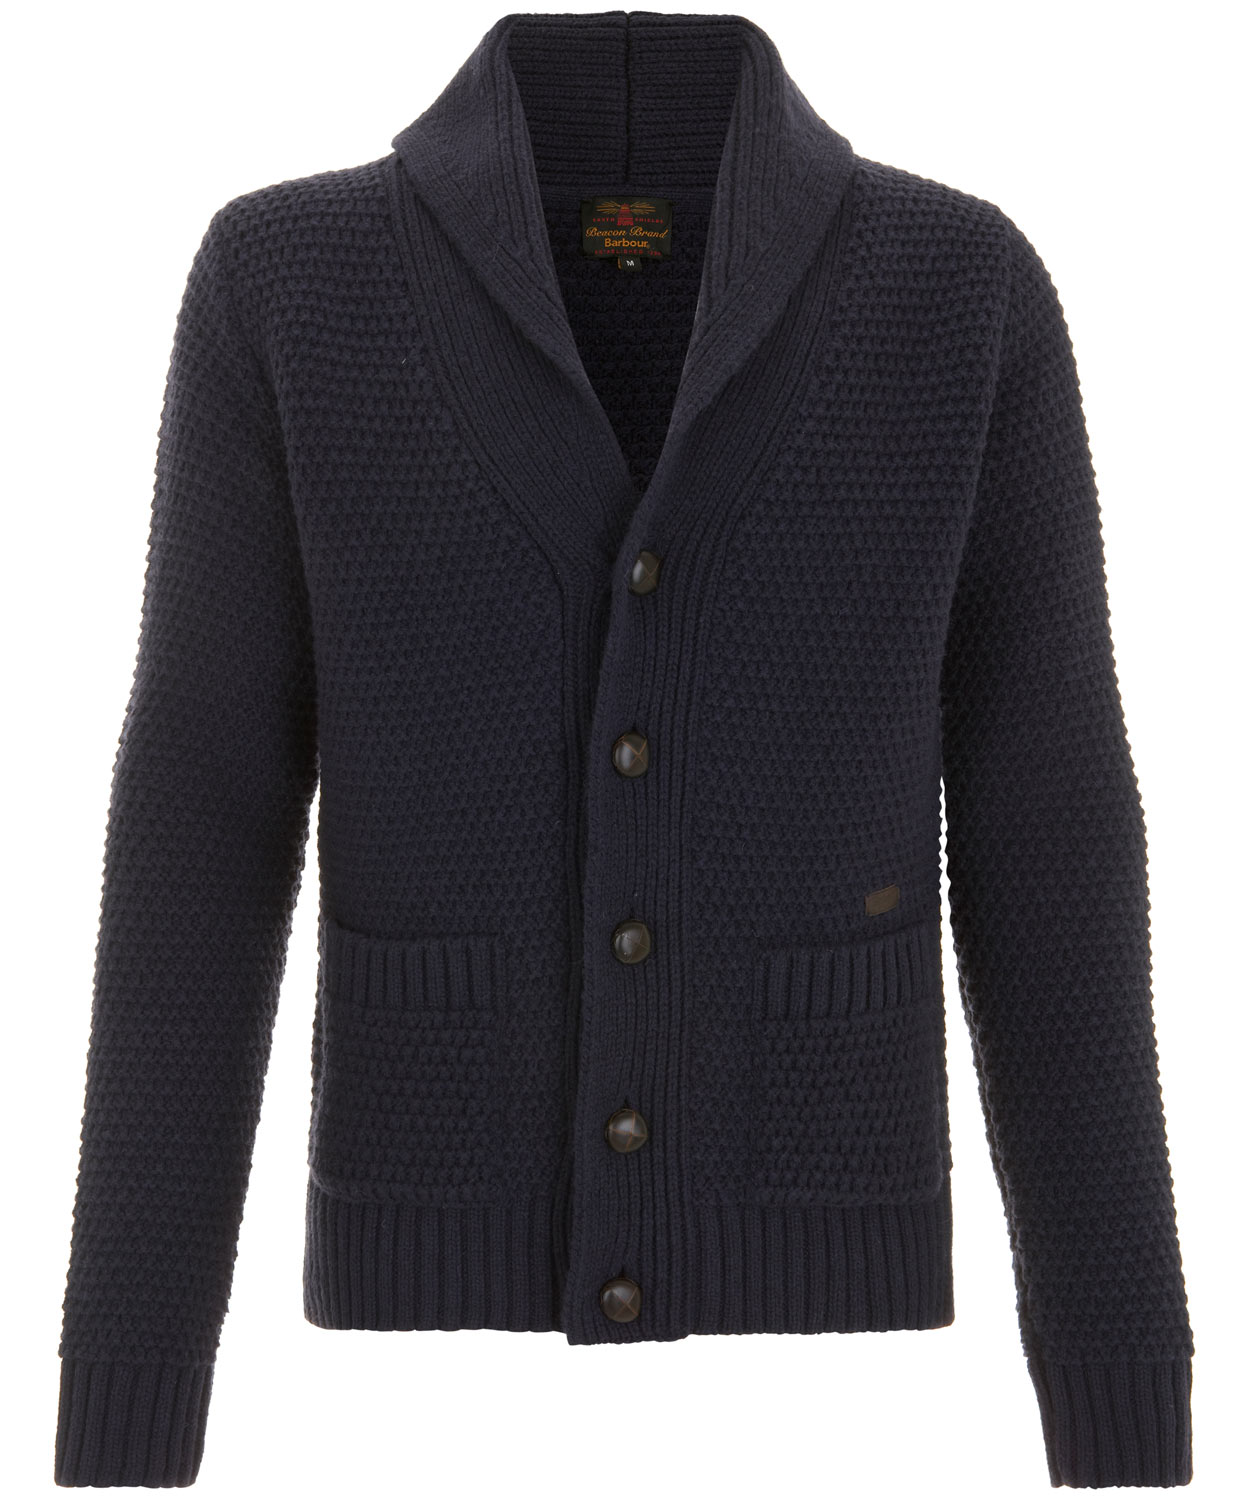 Lyst - Barbour Navy Baltic Shawl Cardigan in Blue for Men